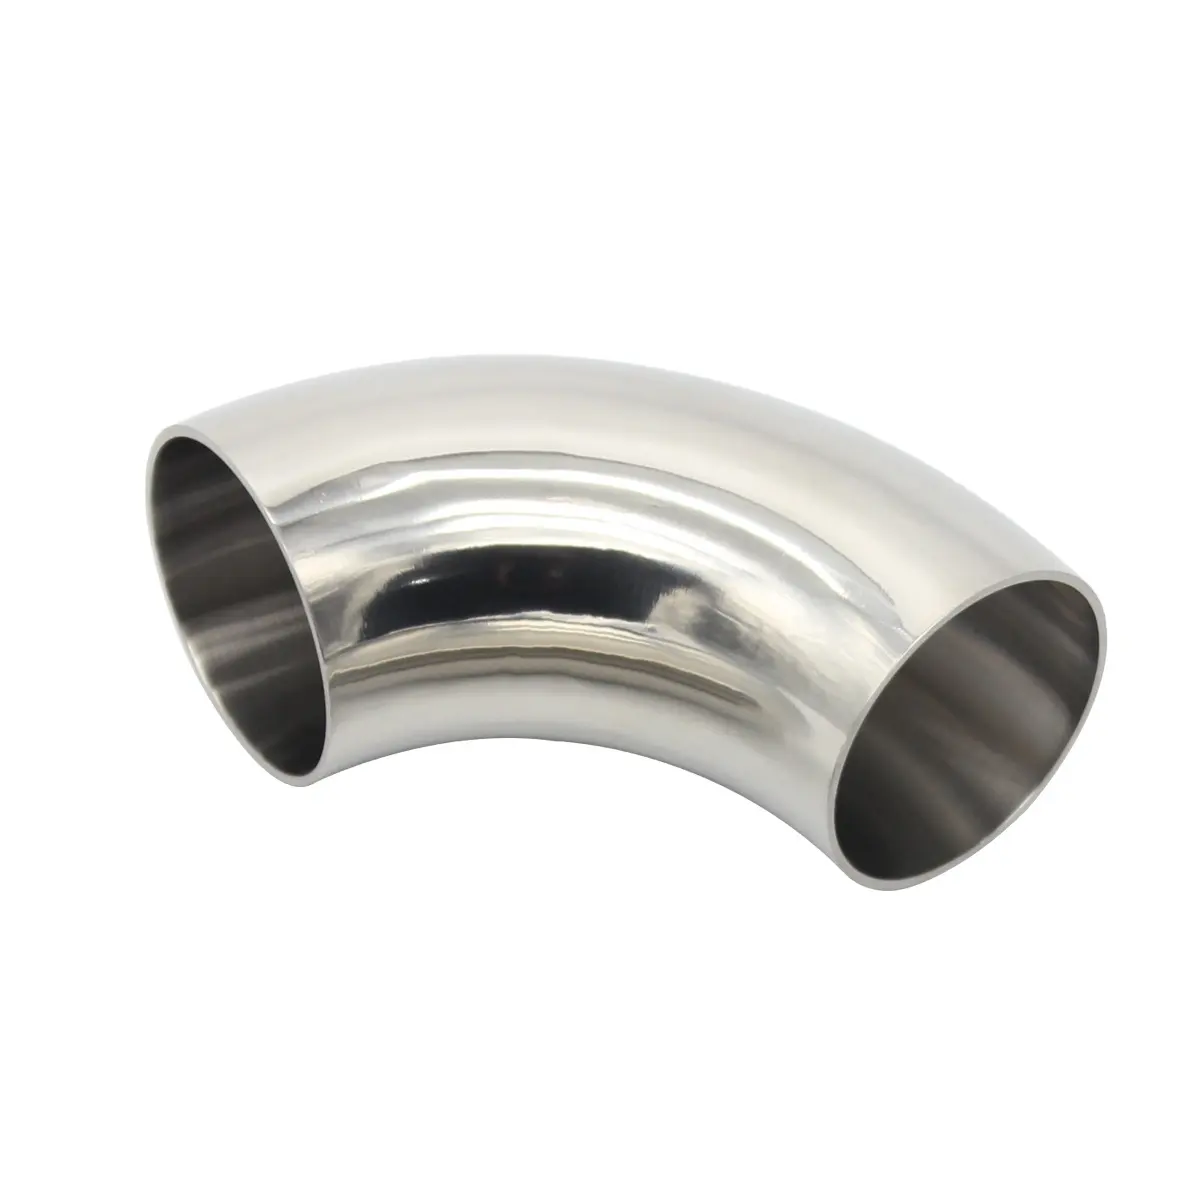 Stainless Steel 304 316L Pipe Fittings Sanitary 45 Degree Bend 90 Degree Bend Long Type Polishing Weld Elbow